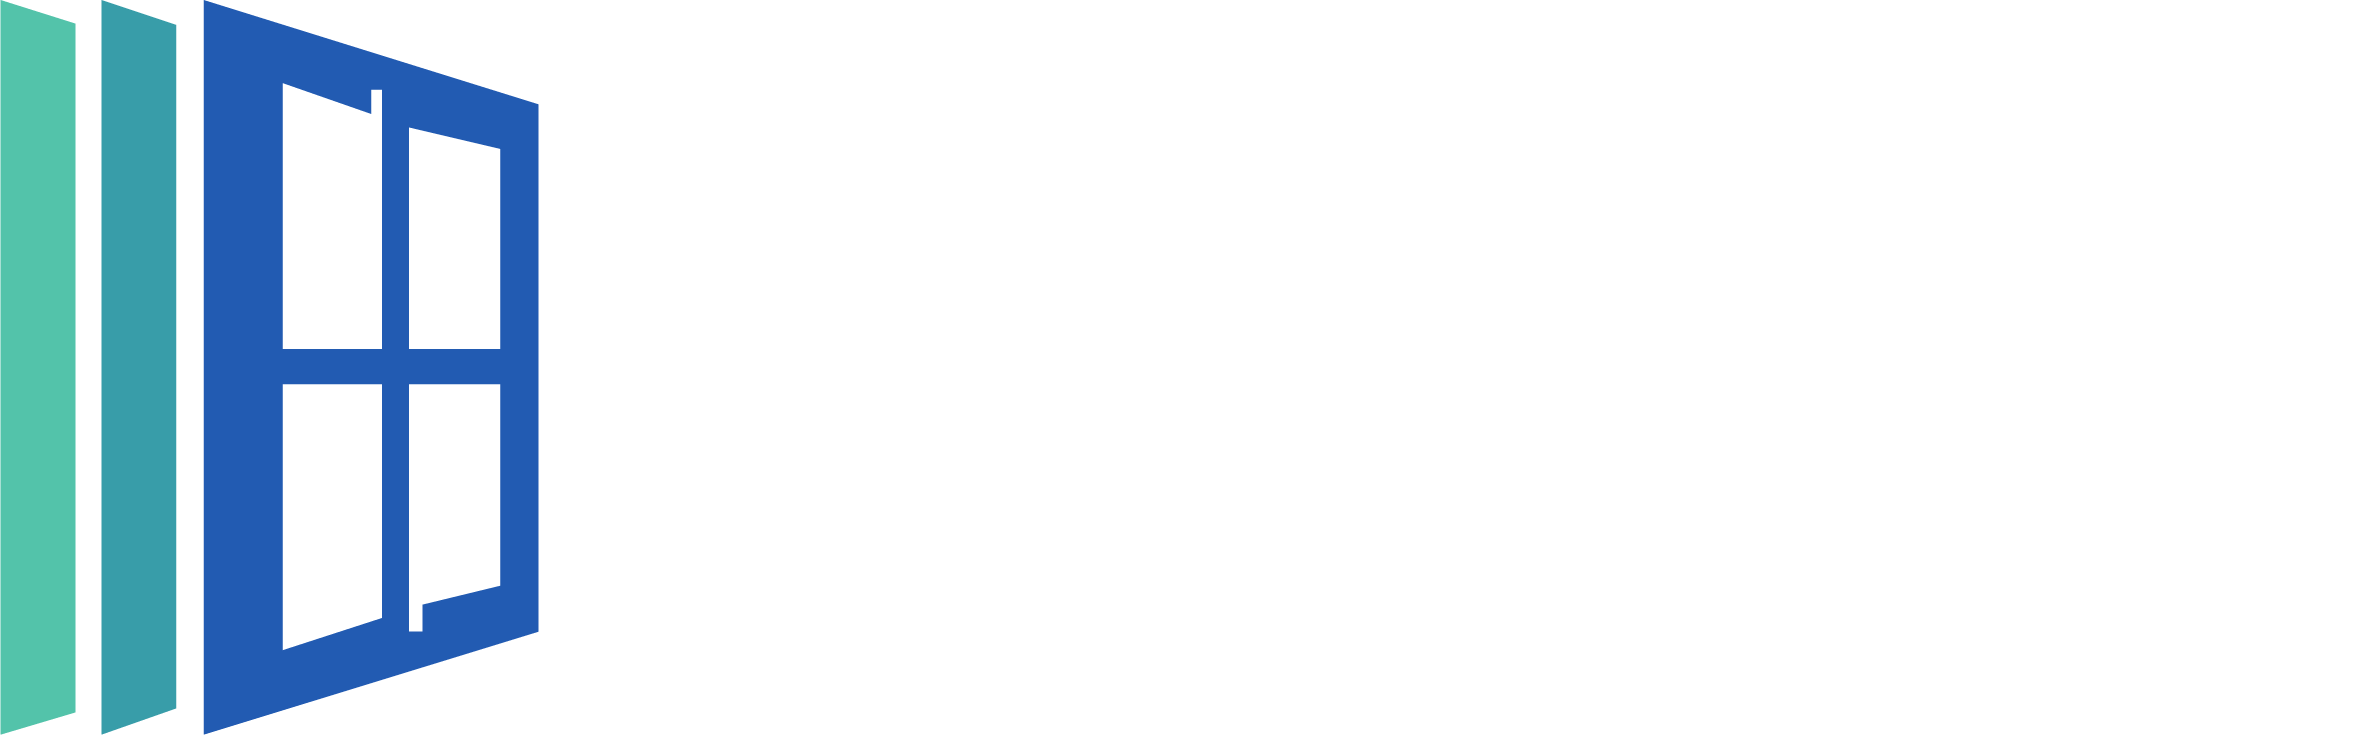 3WindowEstimates.com: A New Free Tool For Homeowners - Syndication Cloud